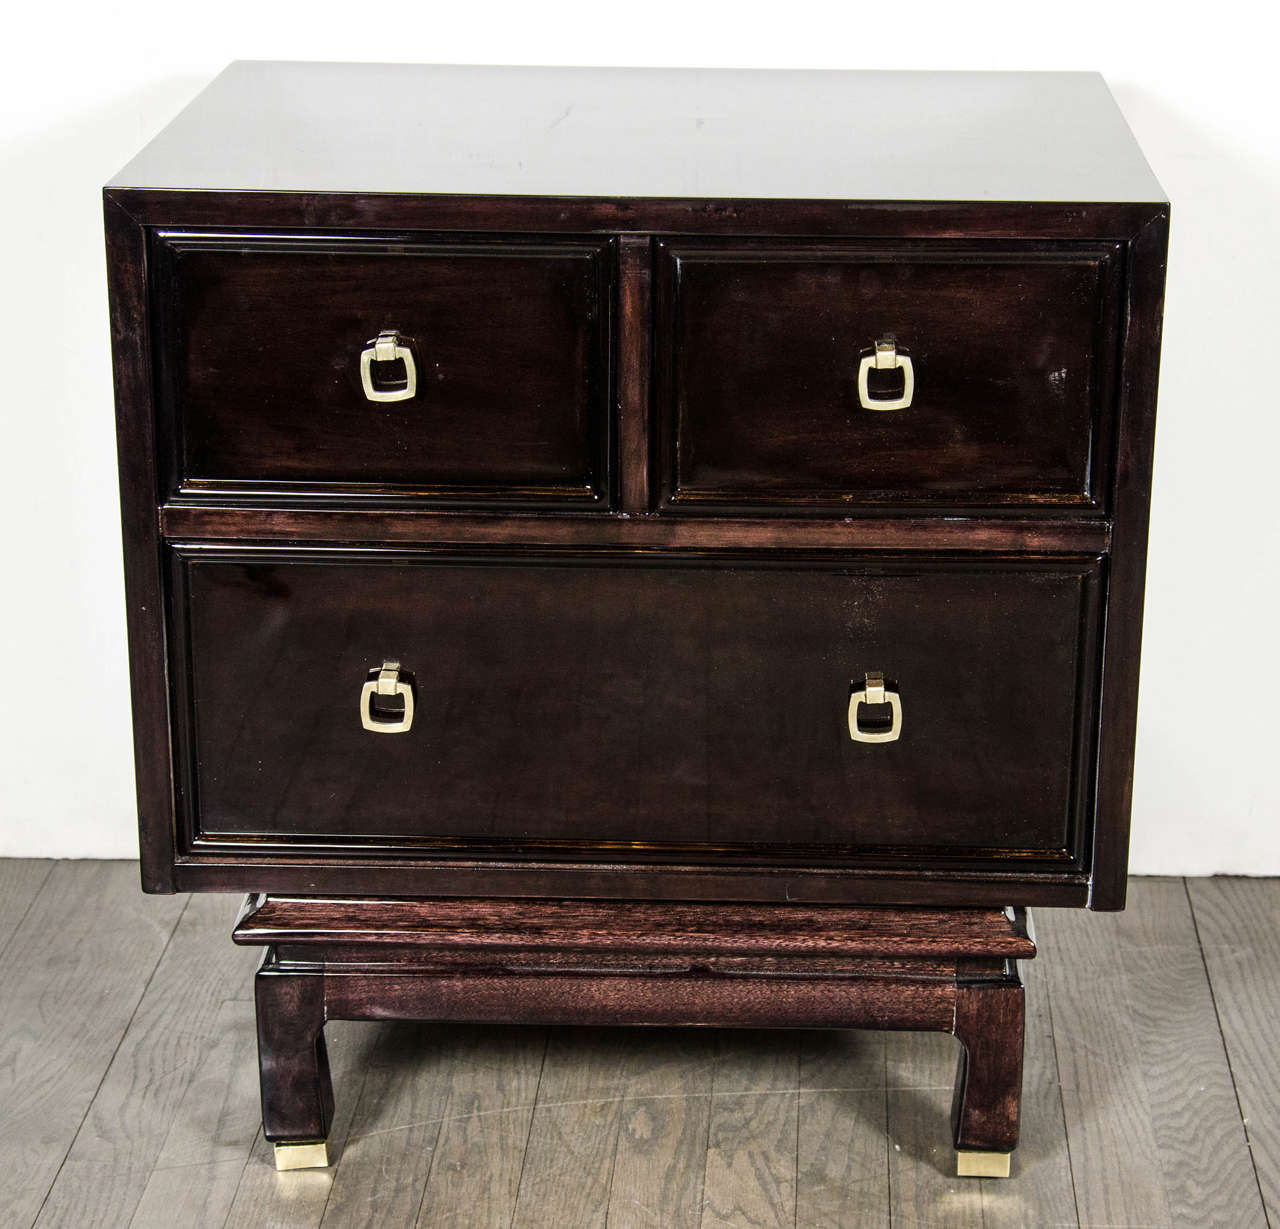 This very sophisticated pair of nightstands / end tables in ebonized mahogany features a pedestal base with brass caps on the feet. The three drawers feature stylized brass drawer pulls and are spacious for maximum storage. These pieces have been